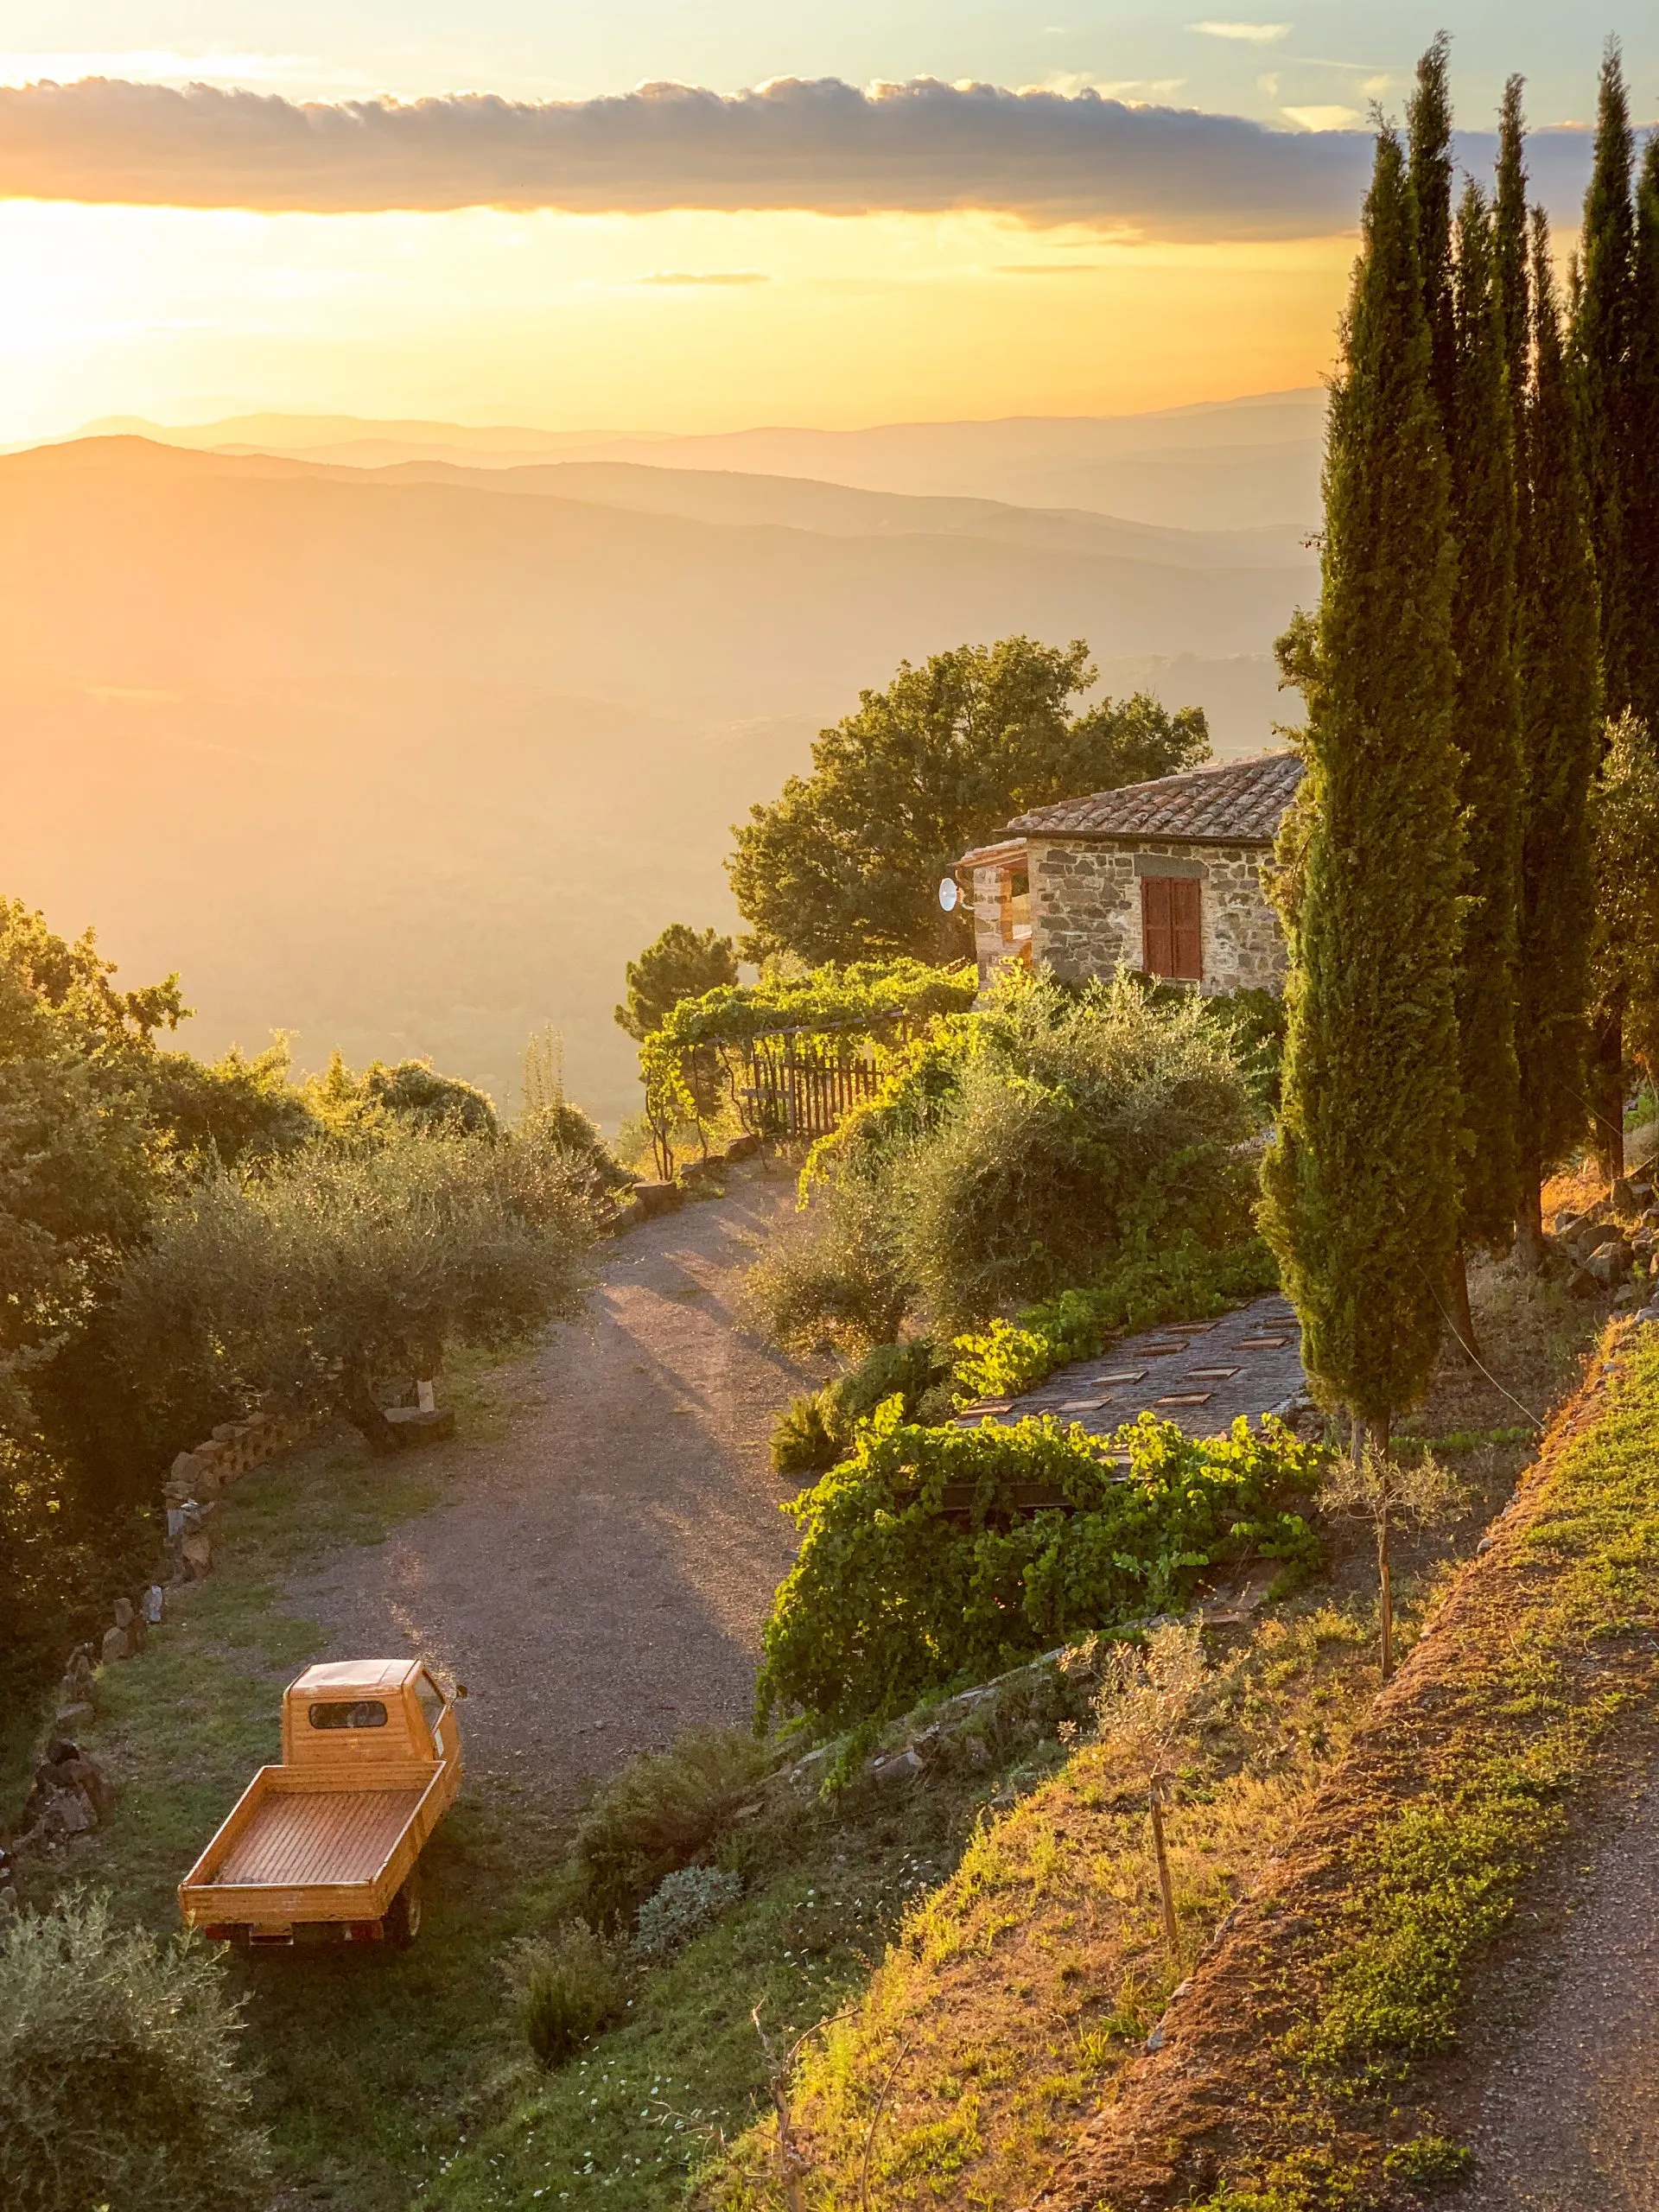 Tuscan countryside stone house with orange three-wheeled pick-up scooter, tall cypress trees, and sunset light flooding distant rolling hills